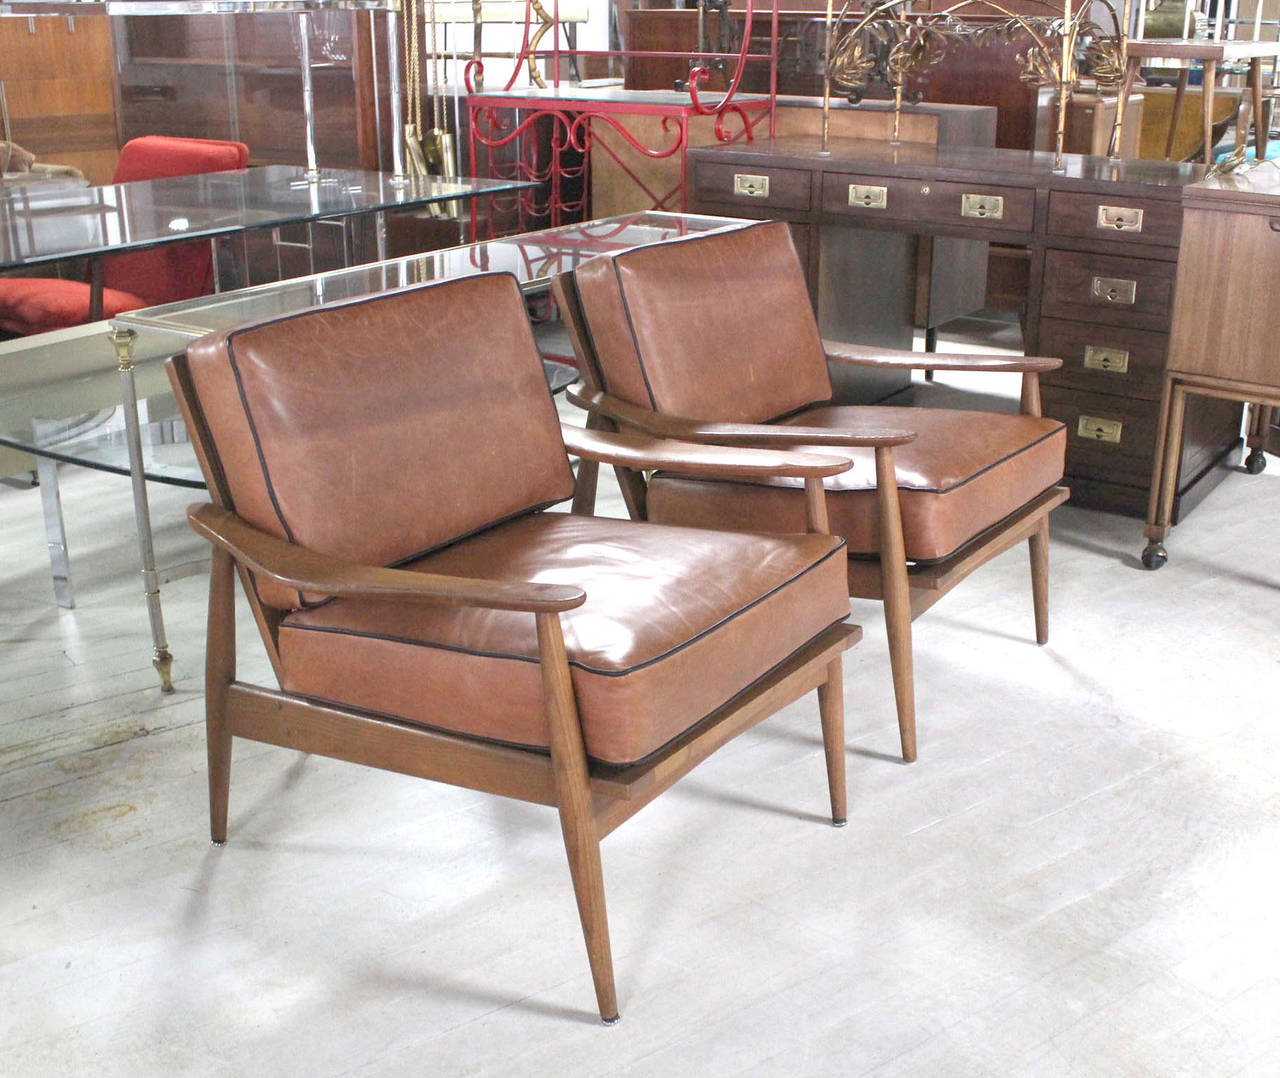 Nice Danish modern lounge chairs with leather upholstery.